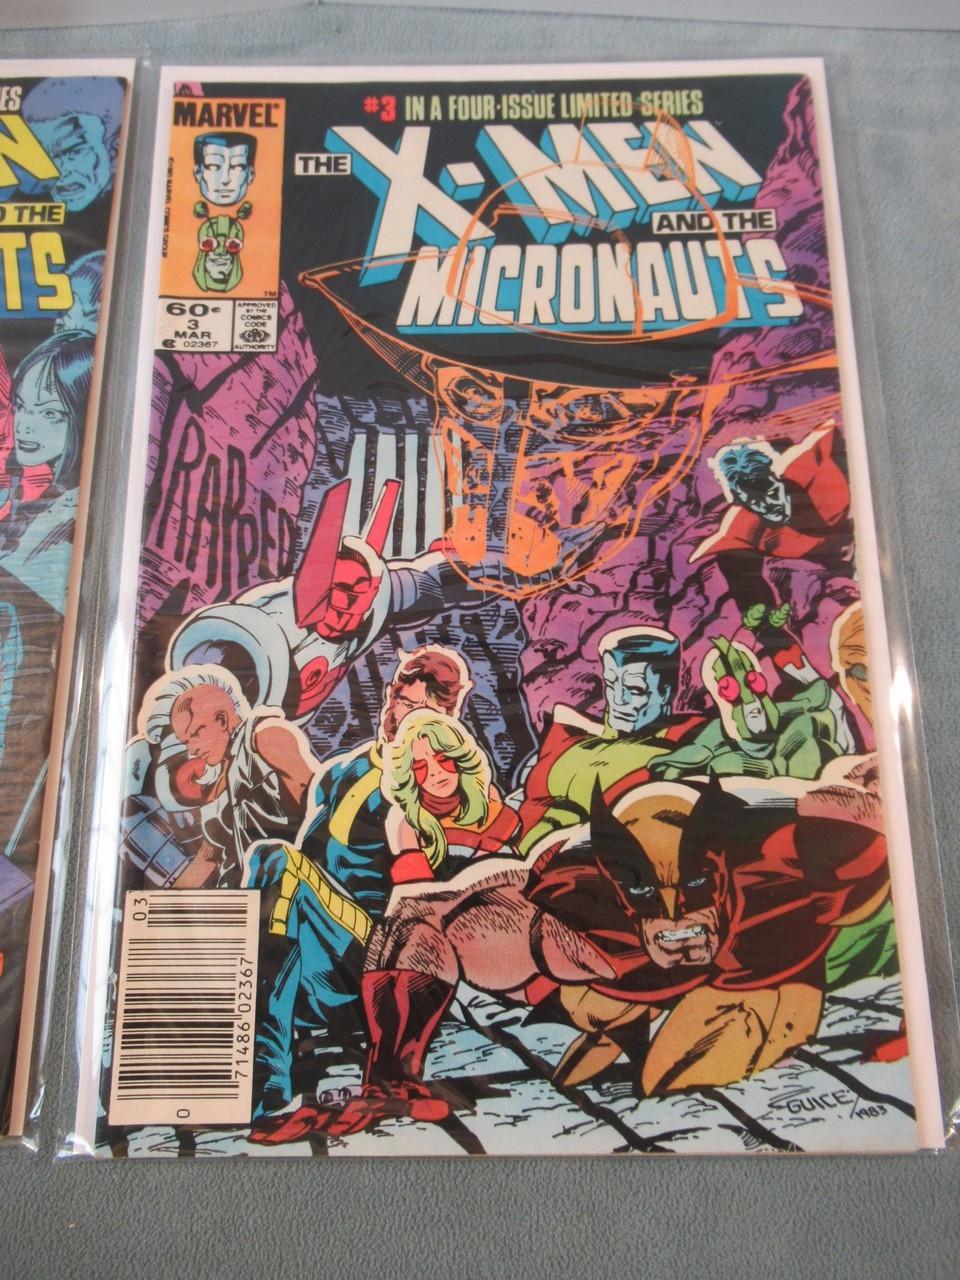 X-Men and the Micronauts #1-4